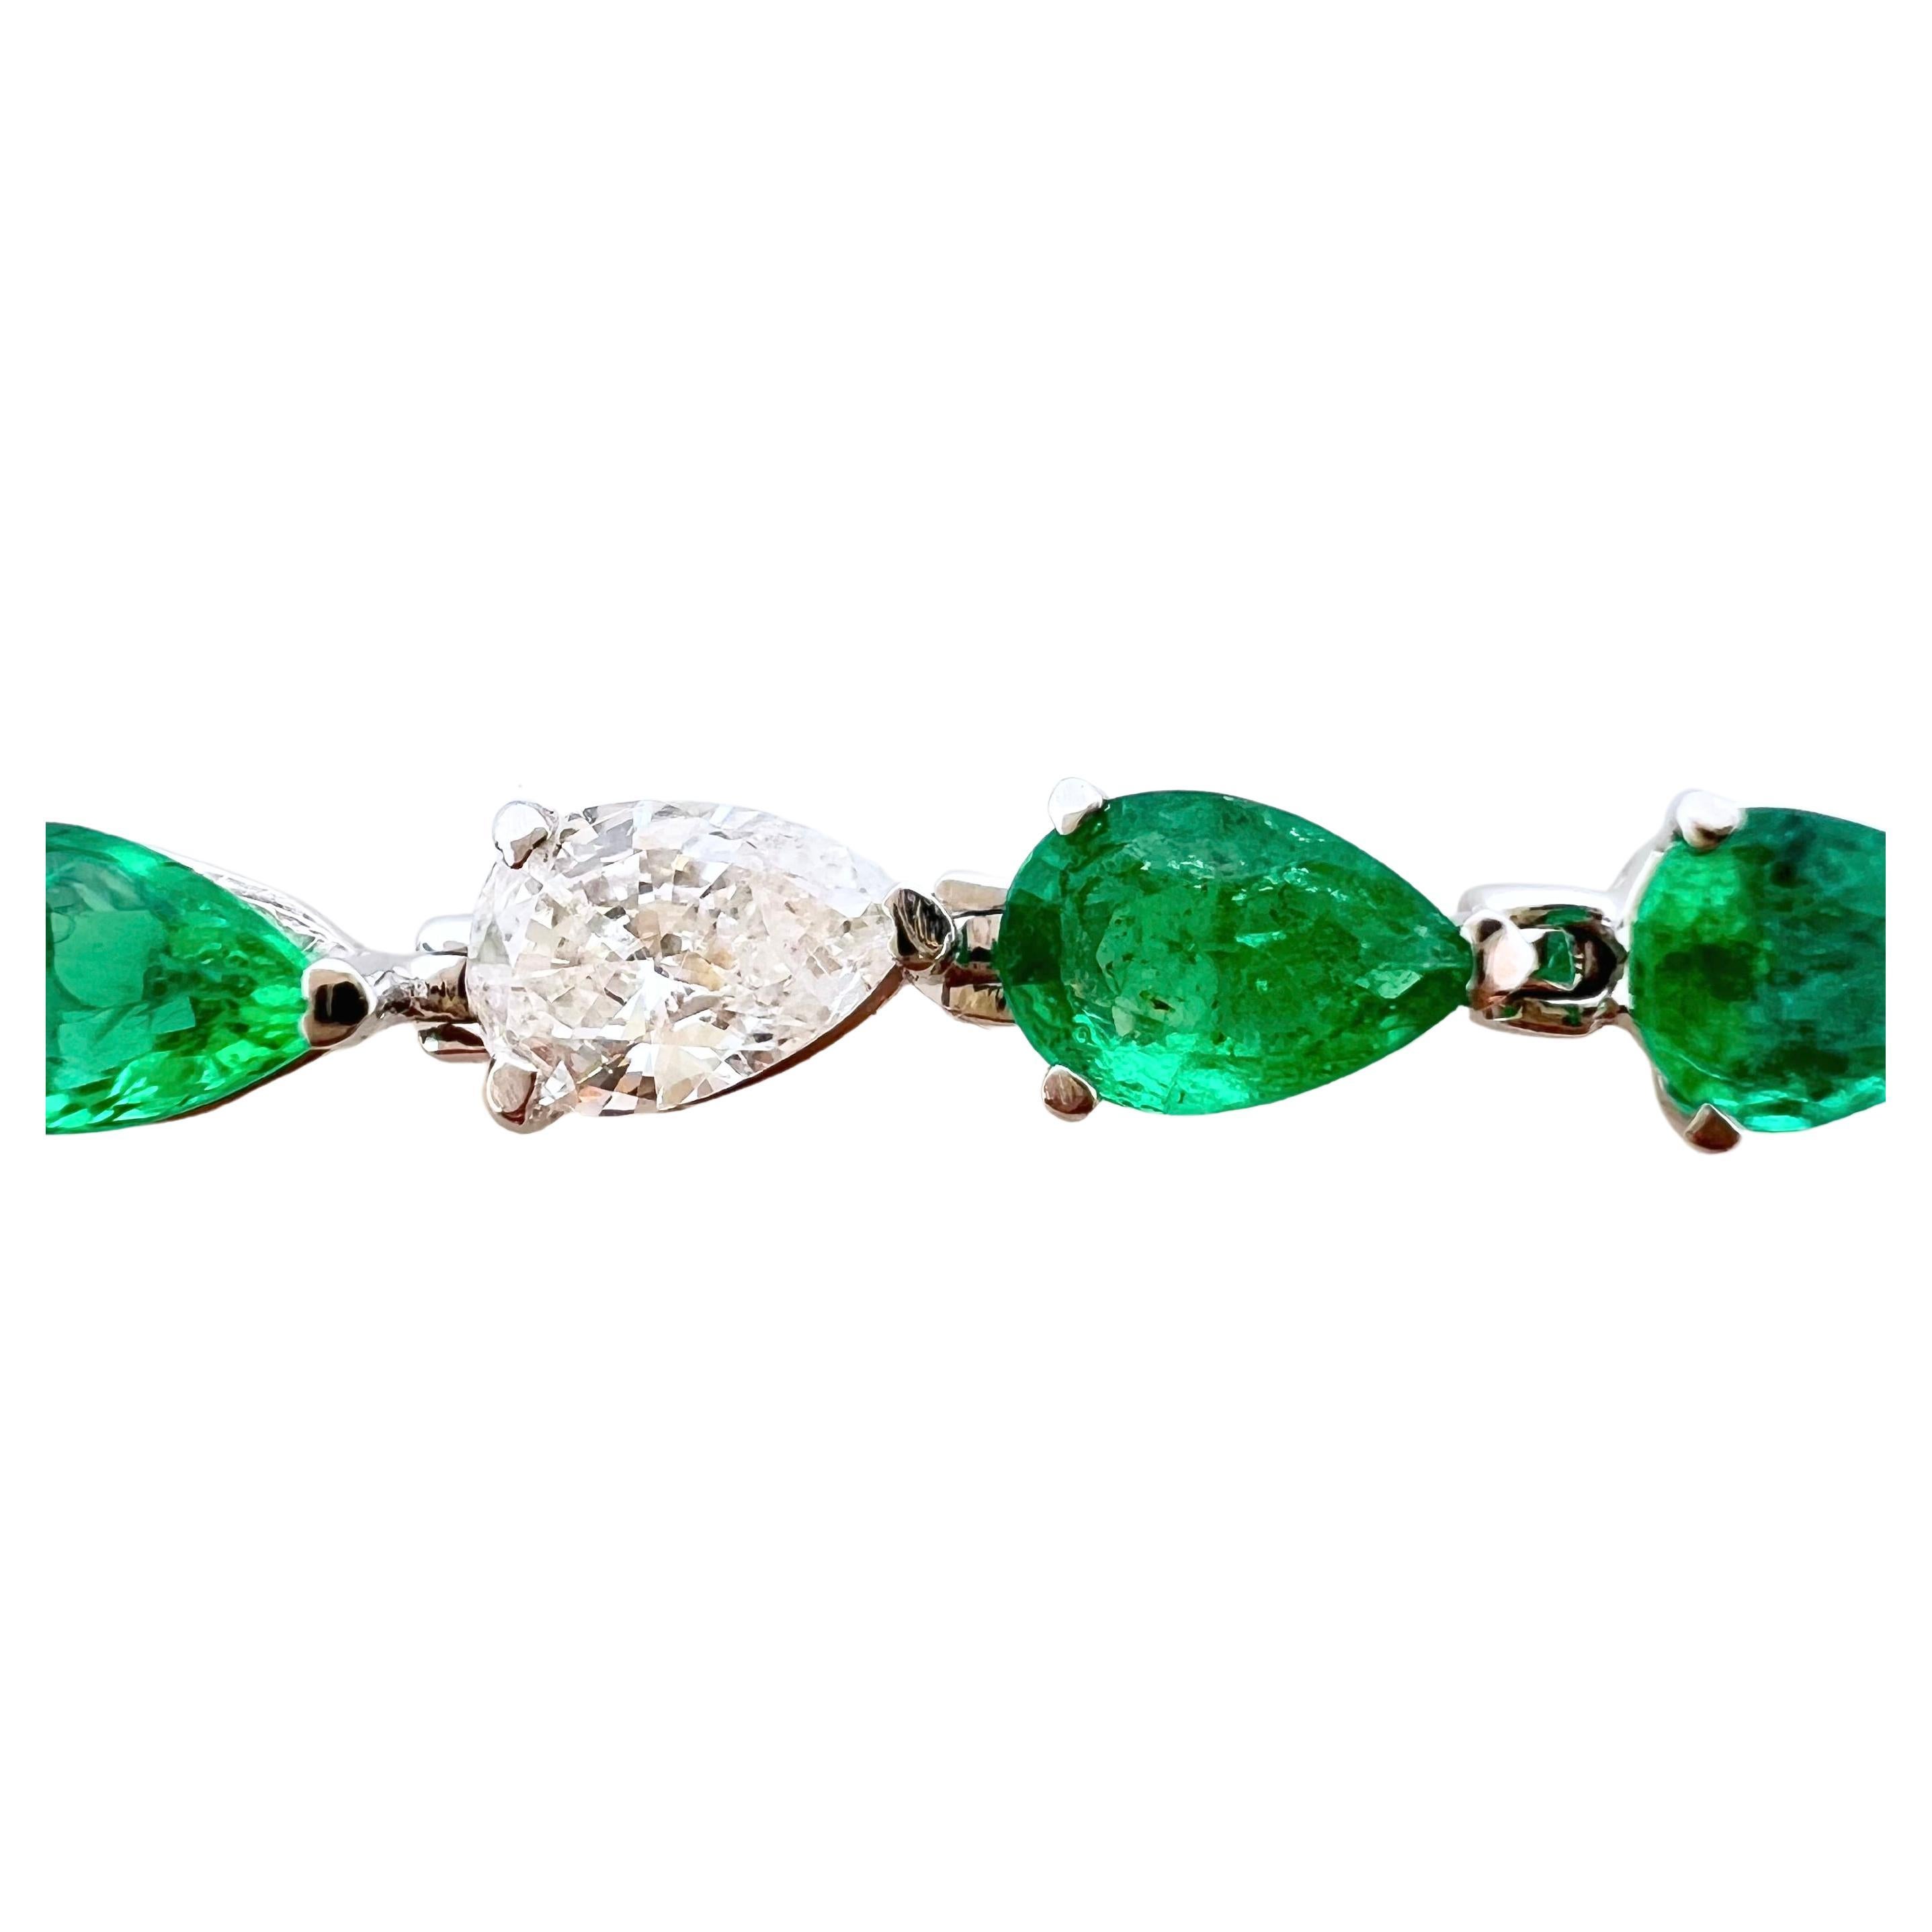 This gorgeous pear shaped emerald bracelet is well matched with pear shaped diamonds strategically places to break up the continuity of the emeralds.  The pear shaped motif is quite unique and not commonly found which will attract everyone's